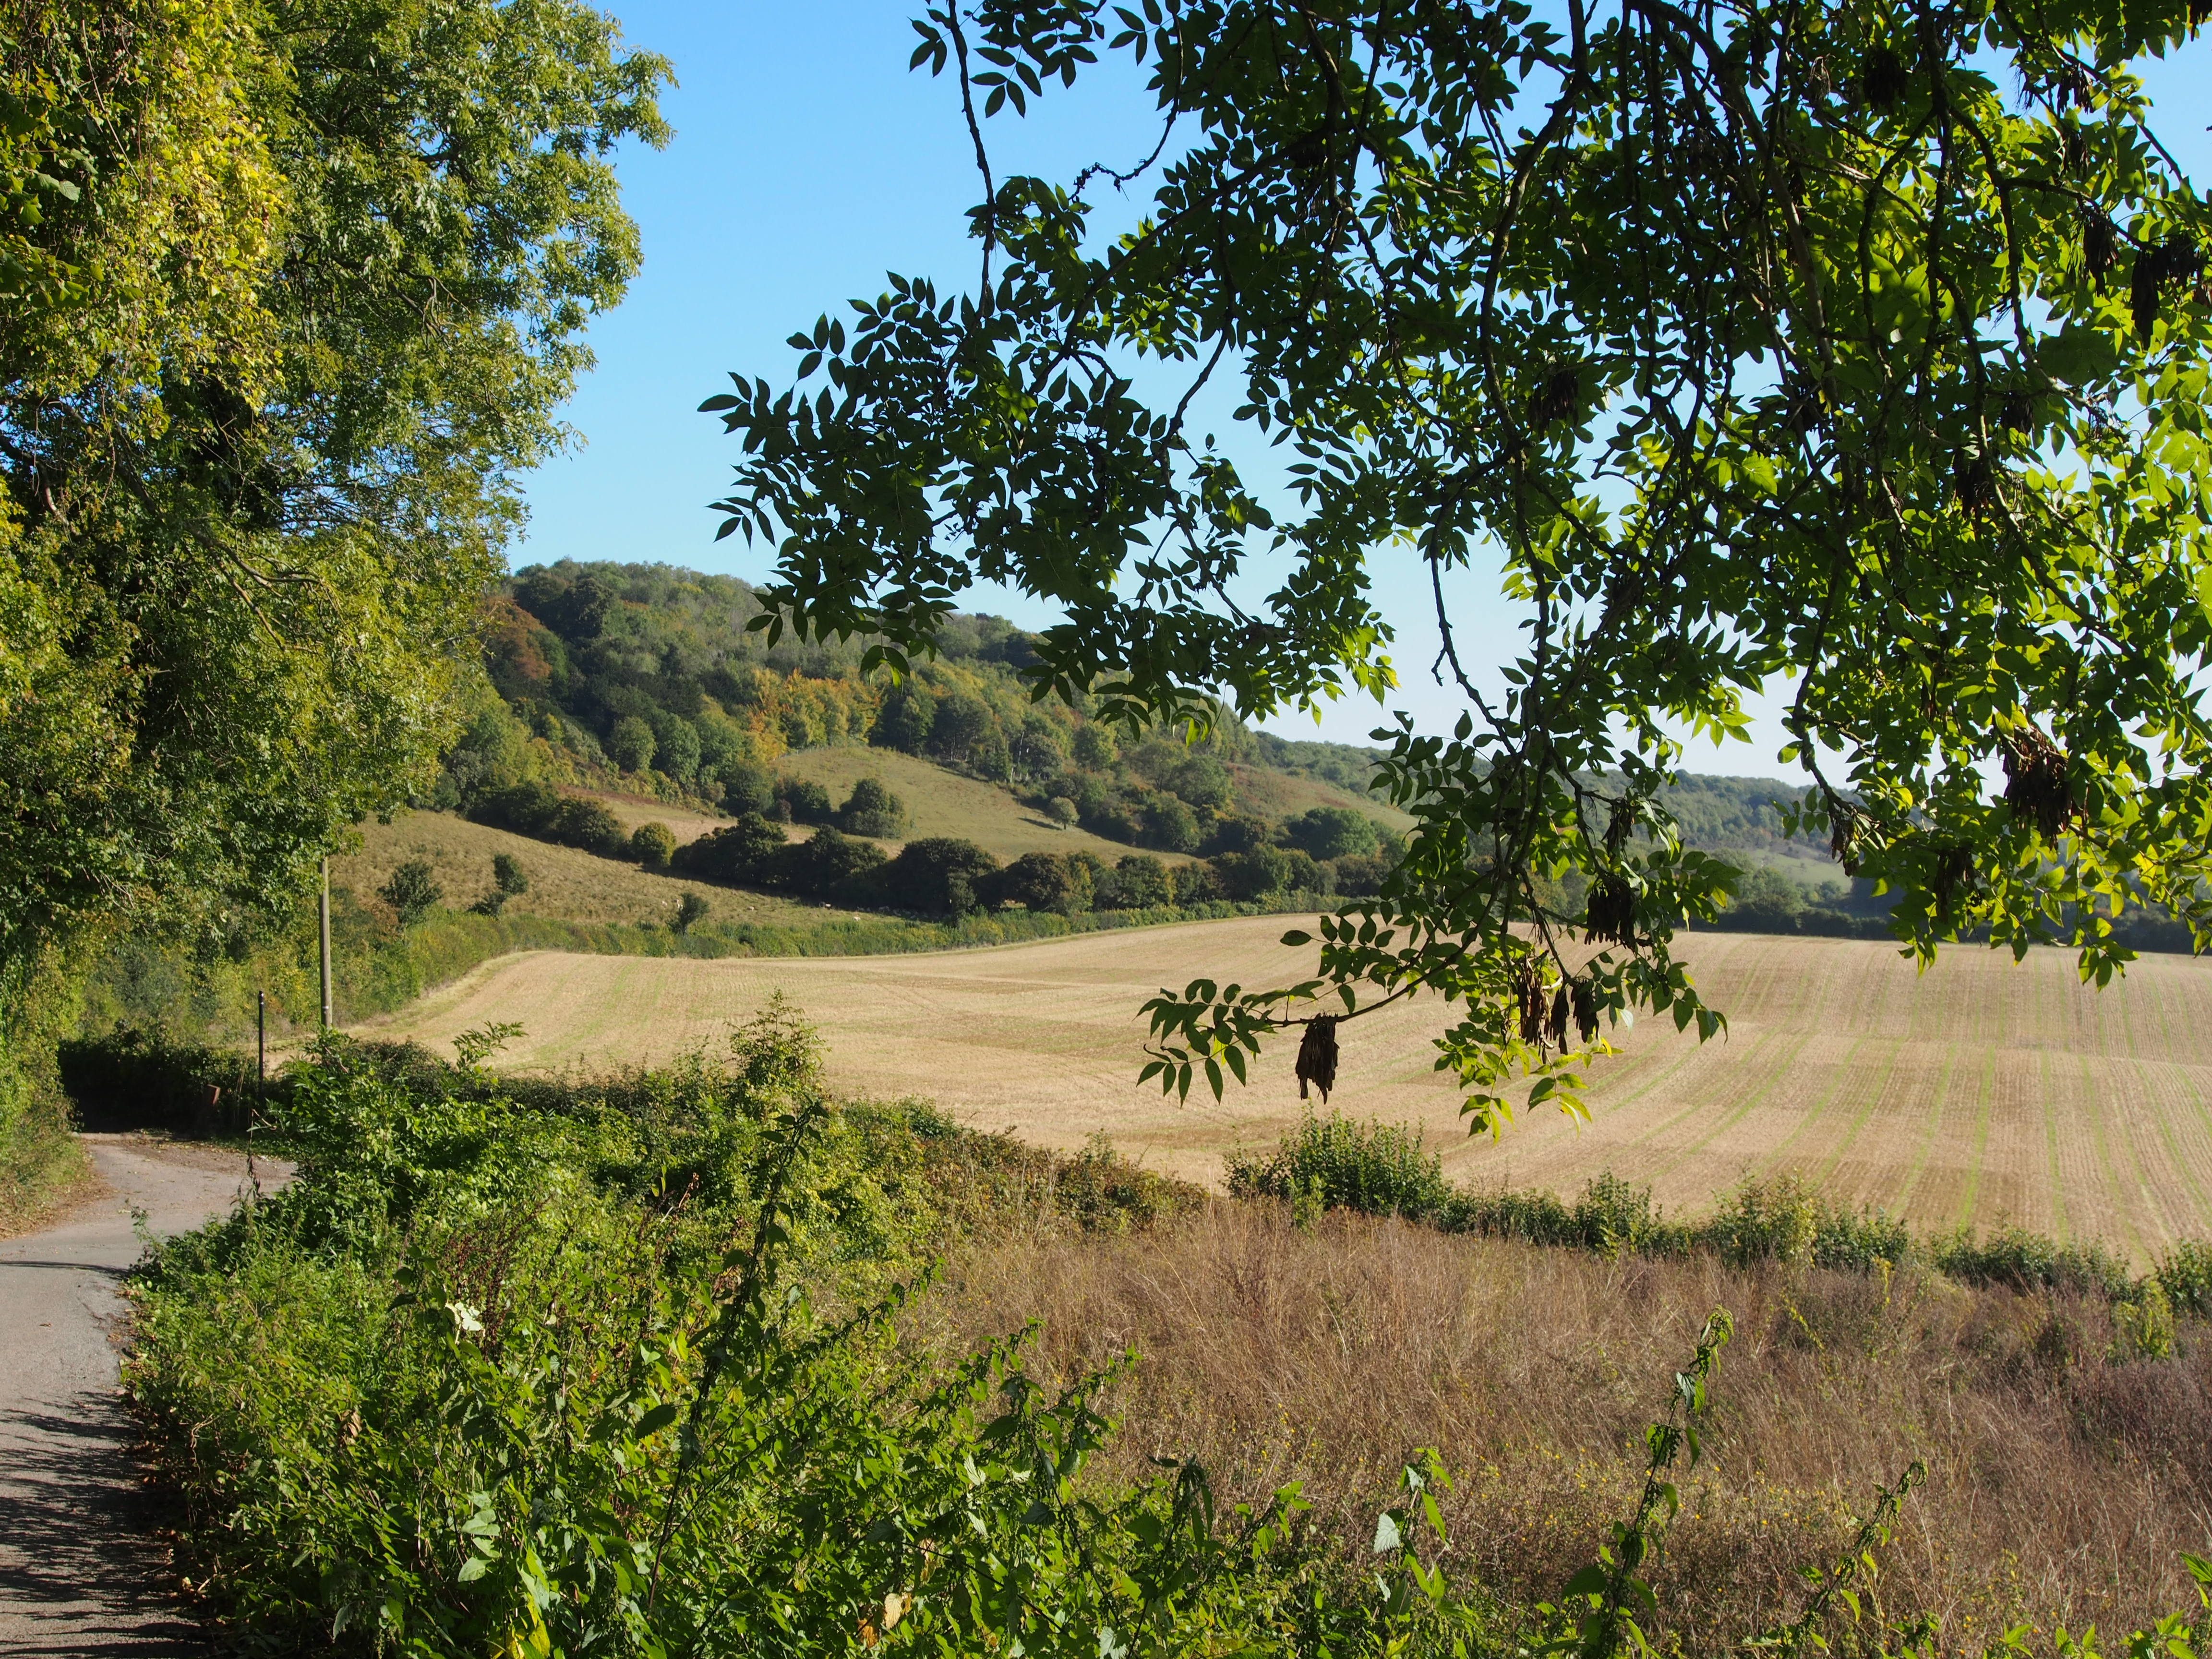 View across crop fields and trees in the distance. On a sunny day, with tree overhanging in foreground.